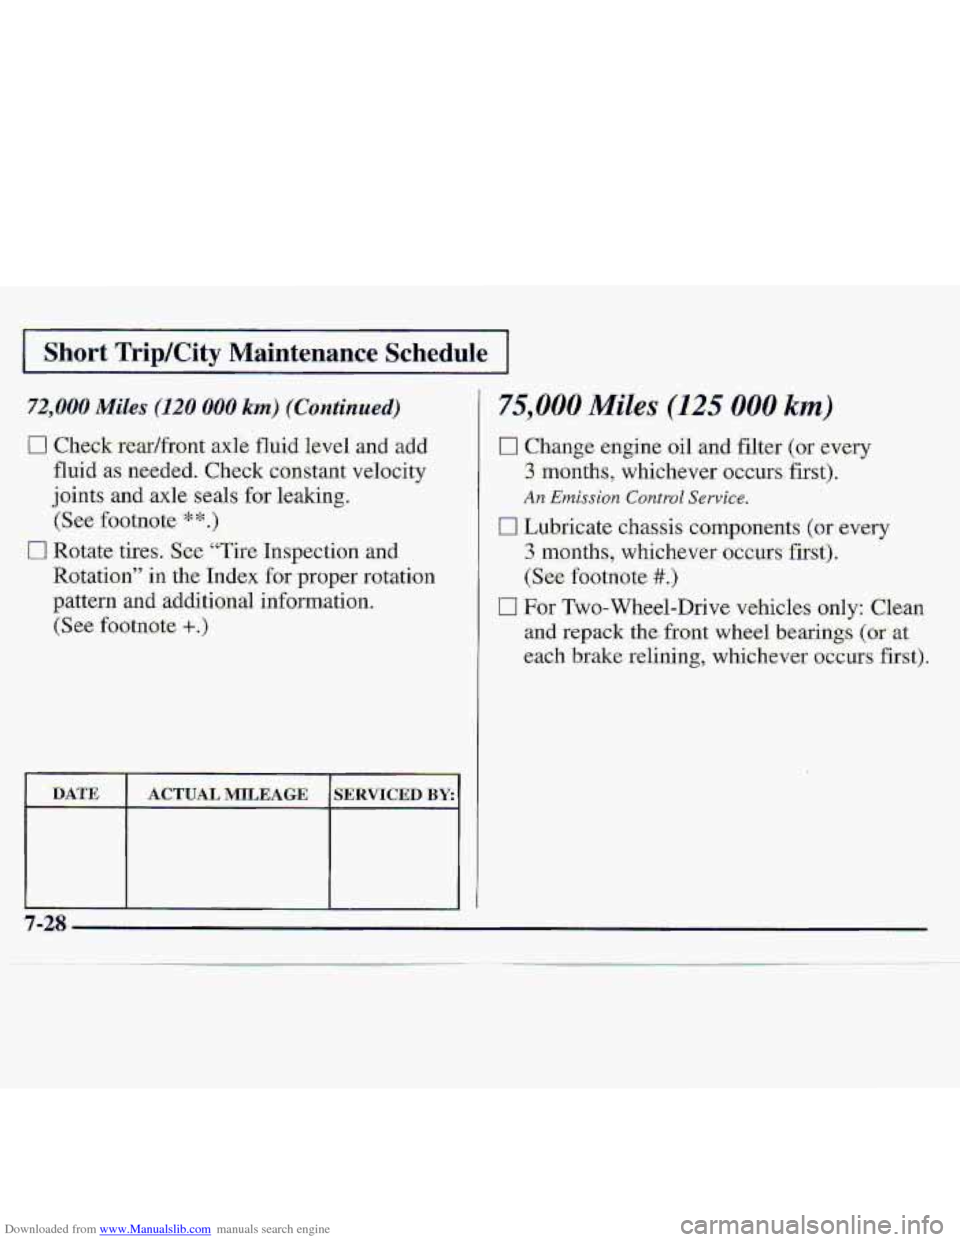 CHEVROLET S10 1997 2.G User Guide Downloaded from www.Manualslib.com manuals search engine I . ..- , .C_”,->. . A L.. -,.. . .. . ,. 
.Short TripKity -Maintenance Sc-hedule. 
0 Check readftont axle fluid level and ad.d 
fluid as nee